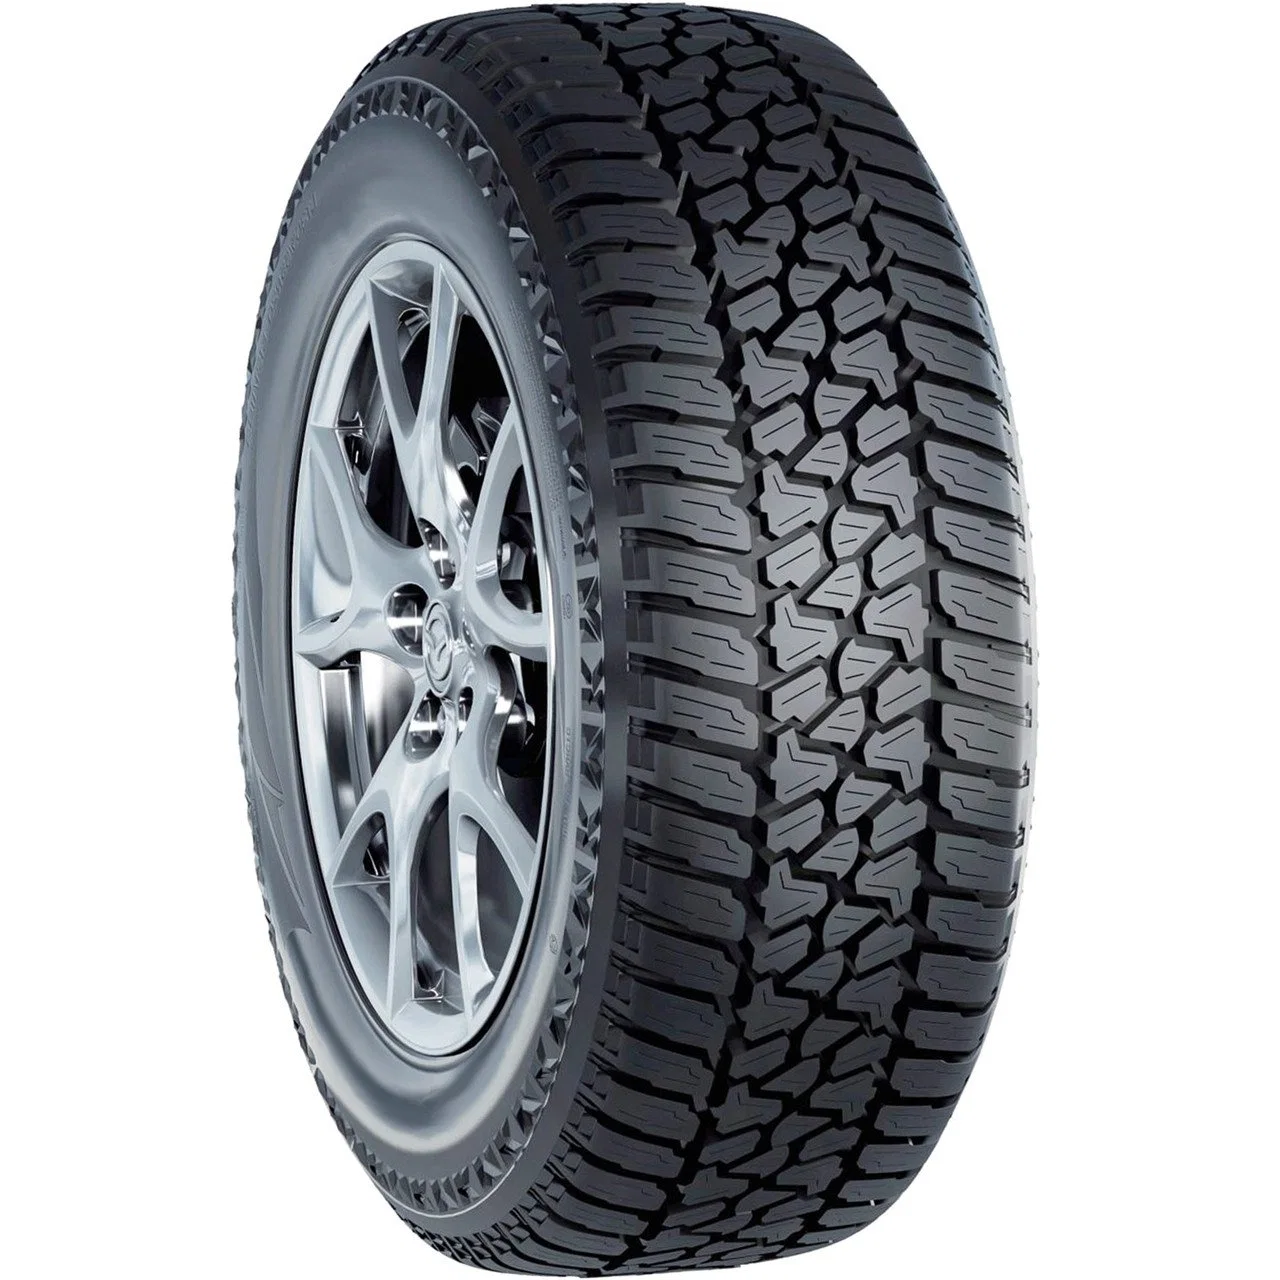 Mileking Haida Double King Joyroad Manufacture Passenger Car Tyre All Road Mud Terrian at/Rt/Mt/SUV/PCR Jeep Light Truck 4X4 Tires Accessories Wholesaler Price